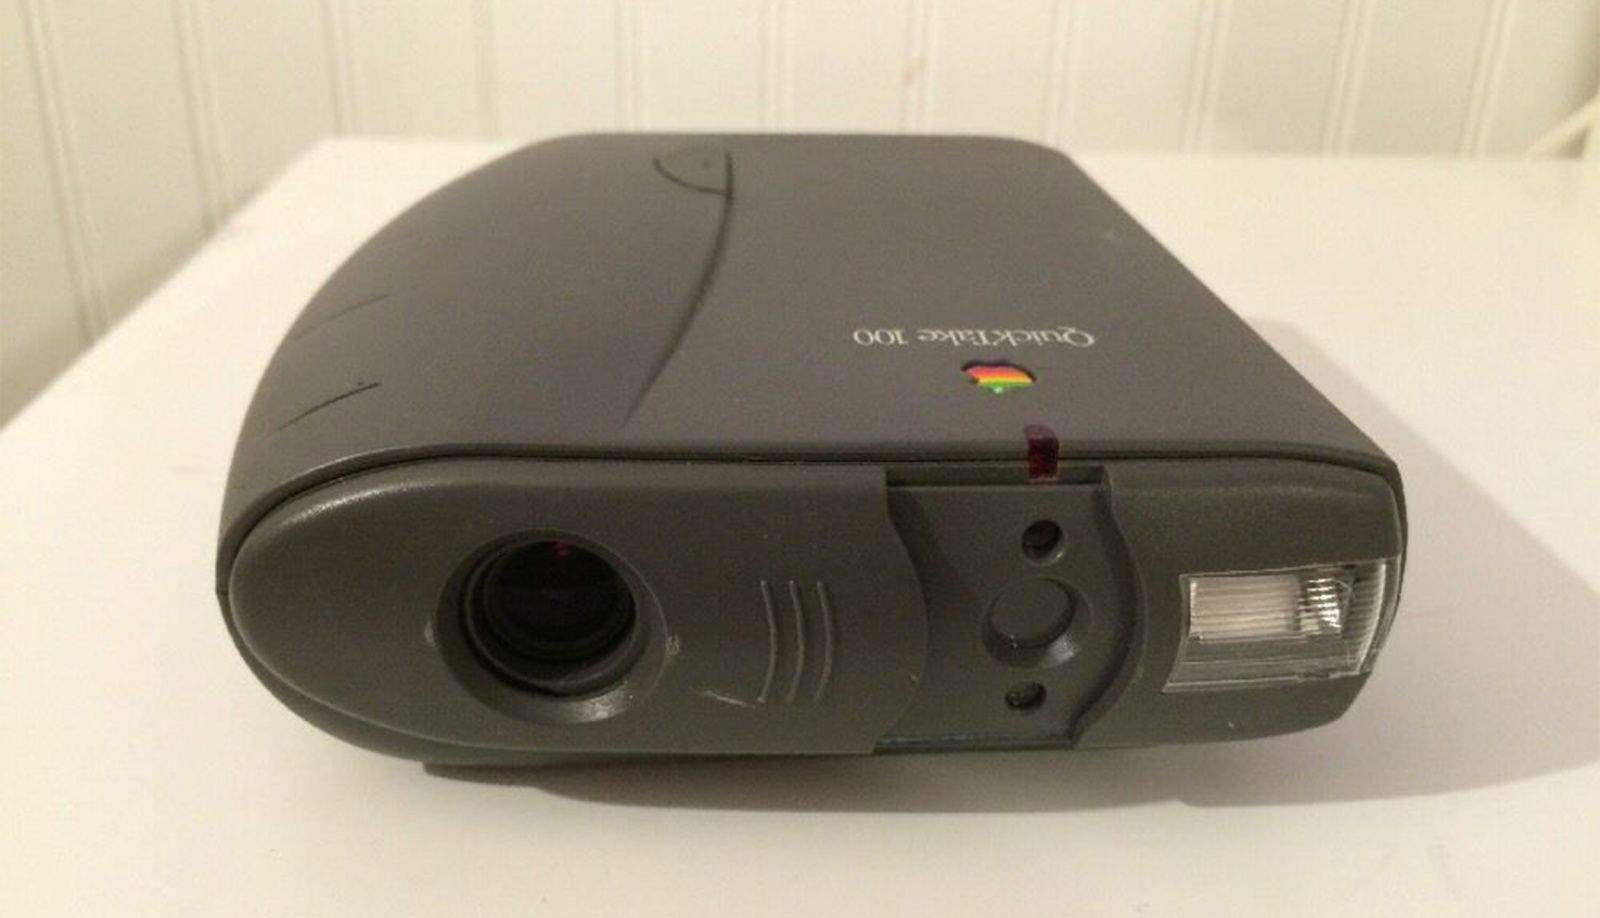 The Apple QuickTake 100 was awful lot of camera to produce awful images. But one of the first consumer digital cameras had to start somewhere.